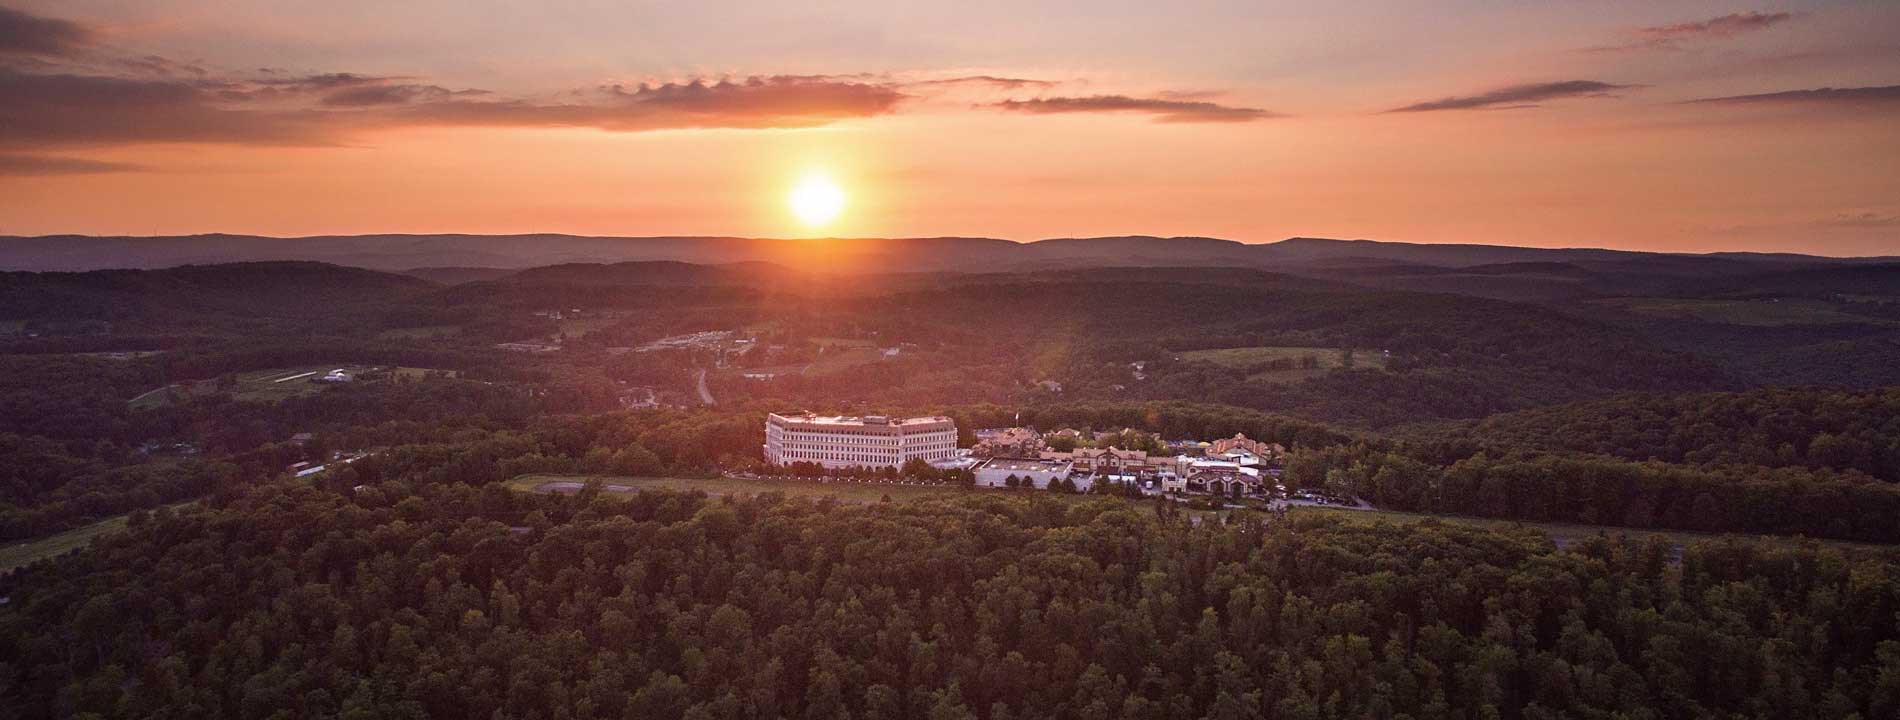 An aerial view of Nemacolin Woodlands Resort.